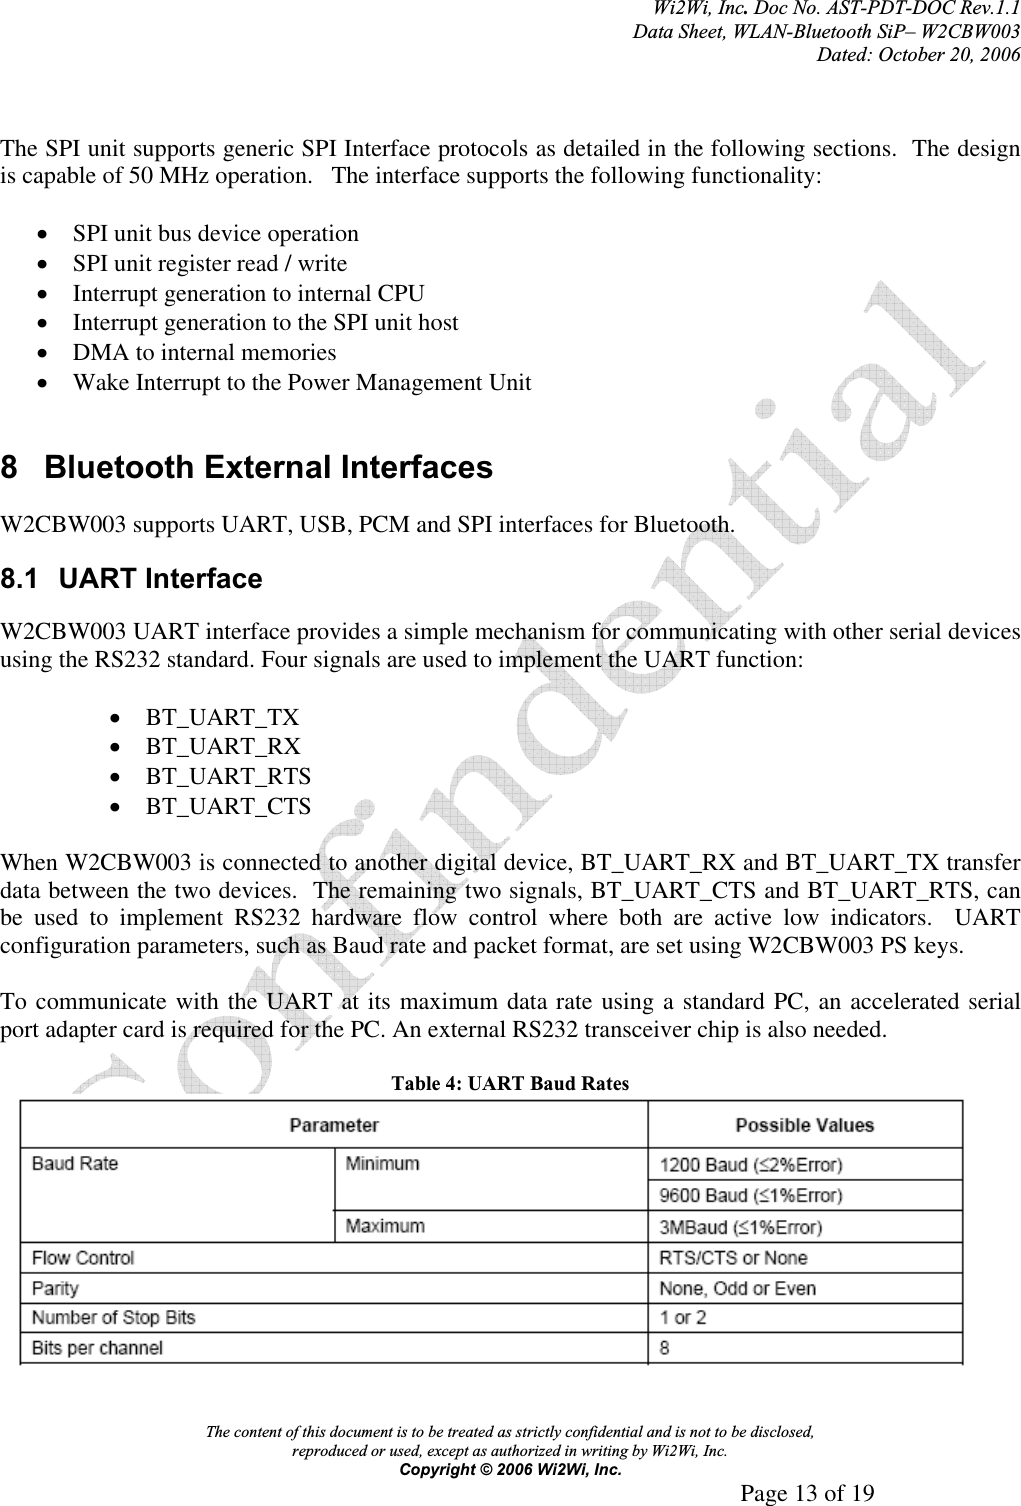 Wi2Wi, Inc.Doc No. AST-PDT-DOC Rev.1.1  Data Sheet, WLAN-Bluetooth SiP– W2CBW003 Dated: October 20, 2006 The content of this document is to be treated as strictly confidential and is not to be disclosed,  reproduced or used, except as authorized in writing by Wi2Wi, Inc.  Copyright © 2006 Wi2Wi, Inc.     Page 13 of 19   The SPI unit supports generic SPI Interface protocols as detailed in the following sections.  The design is capable of 50 MHz operation.   The interface supports the following functionality: xSPI unit bus device operation xSPI unit register read / write xInterrupt generation to internal CPU xInterrupt generation to the SPI unit host xDMA to internal memories xWake Interrupt to the Power Management Unit 8  Bluetooth External Interfaces W2CBW003 supports UART, USB, PCM and SPI interfaces for Bluetooth. 8.1 UART Interface W2CBW003 UART interface provides a simple mechanism for communicating with other serial devices using the RS232 standard. Four signals are used to implement the UART function: xBT_UART_TX xBT_UART_RX xBT_UART_RTS xBT_UART_CTS When W2CBW003 is connected to another digital device, BT_UART_RX and BT_UART_TX transfer data between the two devices.  The remaining two signals, BT_UART_CTS and BT_UART_RTS, can be used to implement RS232 hardware flow control where both are active low indicators.  UART configuration parameters, such as Baud rate and packet format, are set using W2CBW003 PS keys. To communicate with the UART at its maximum data rate using a standard PC, an accelerated serial port adapter card is required for the PC. An external RS232 transceiver chip is also needed. Table 4: UART Baud Rates 